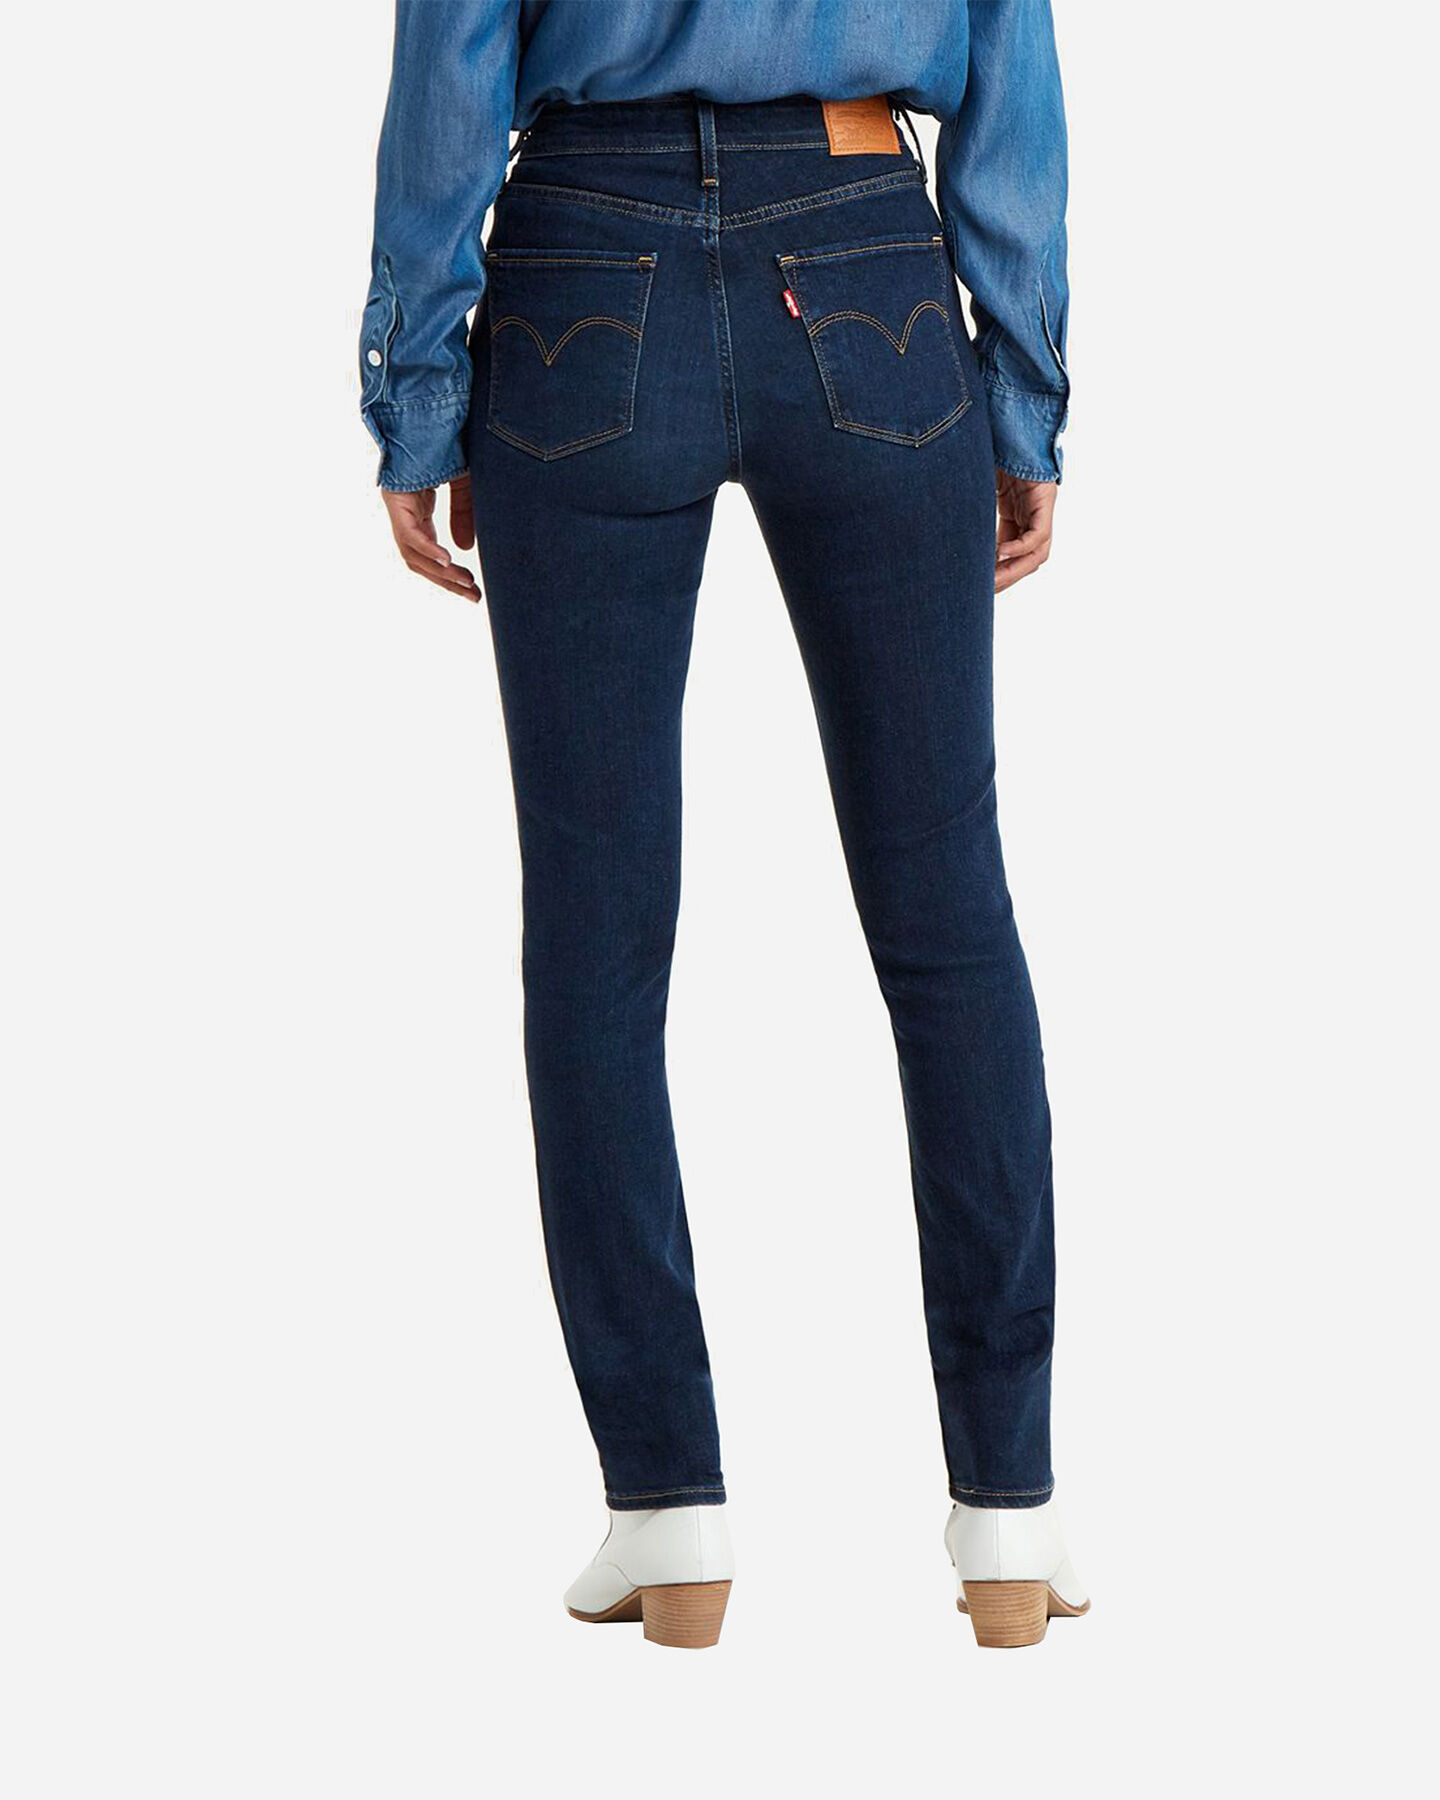  Jeans LEVI'S 721 HIGH RISE SKINNY  W S4097258 scatto 2